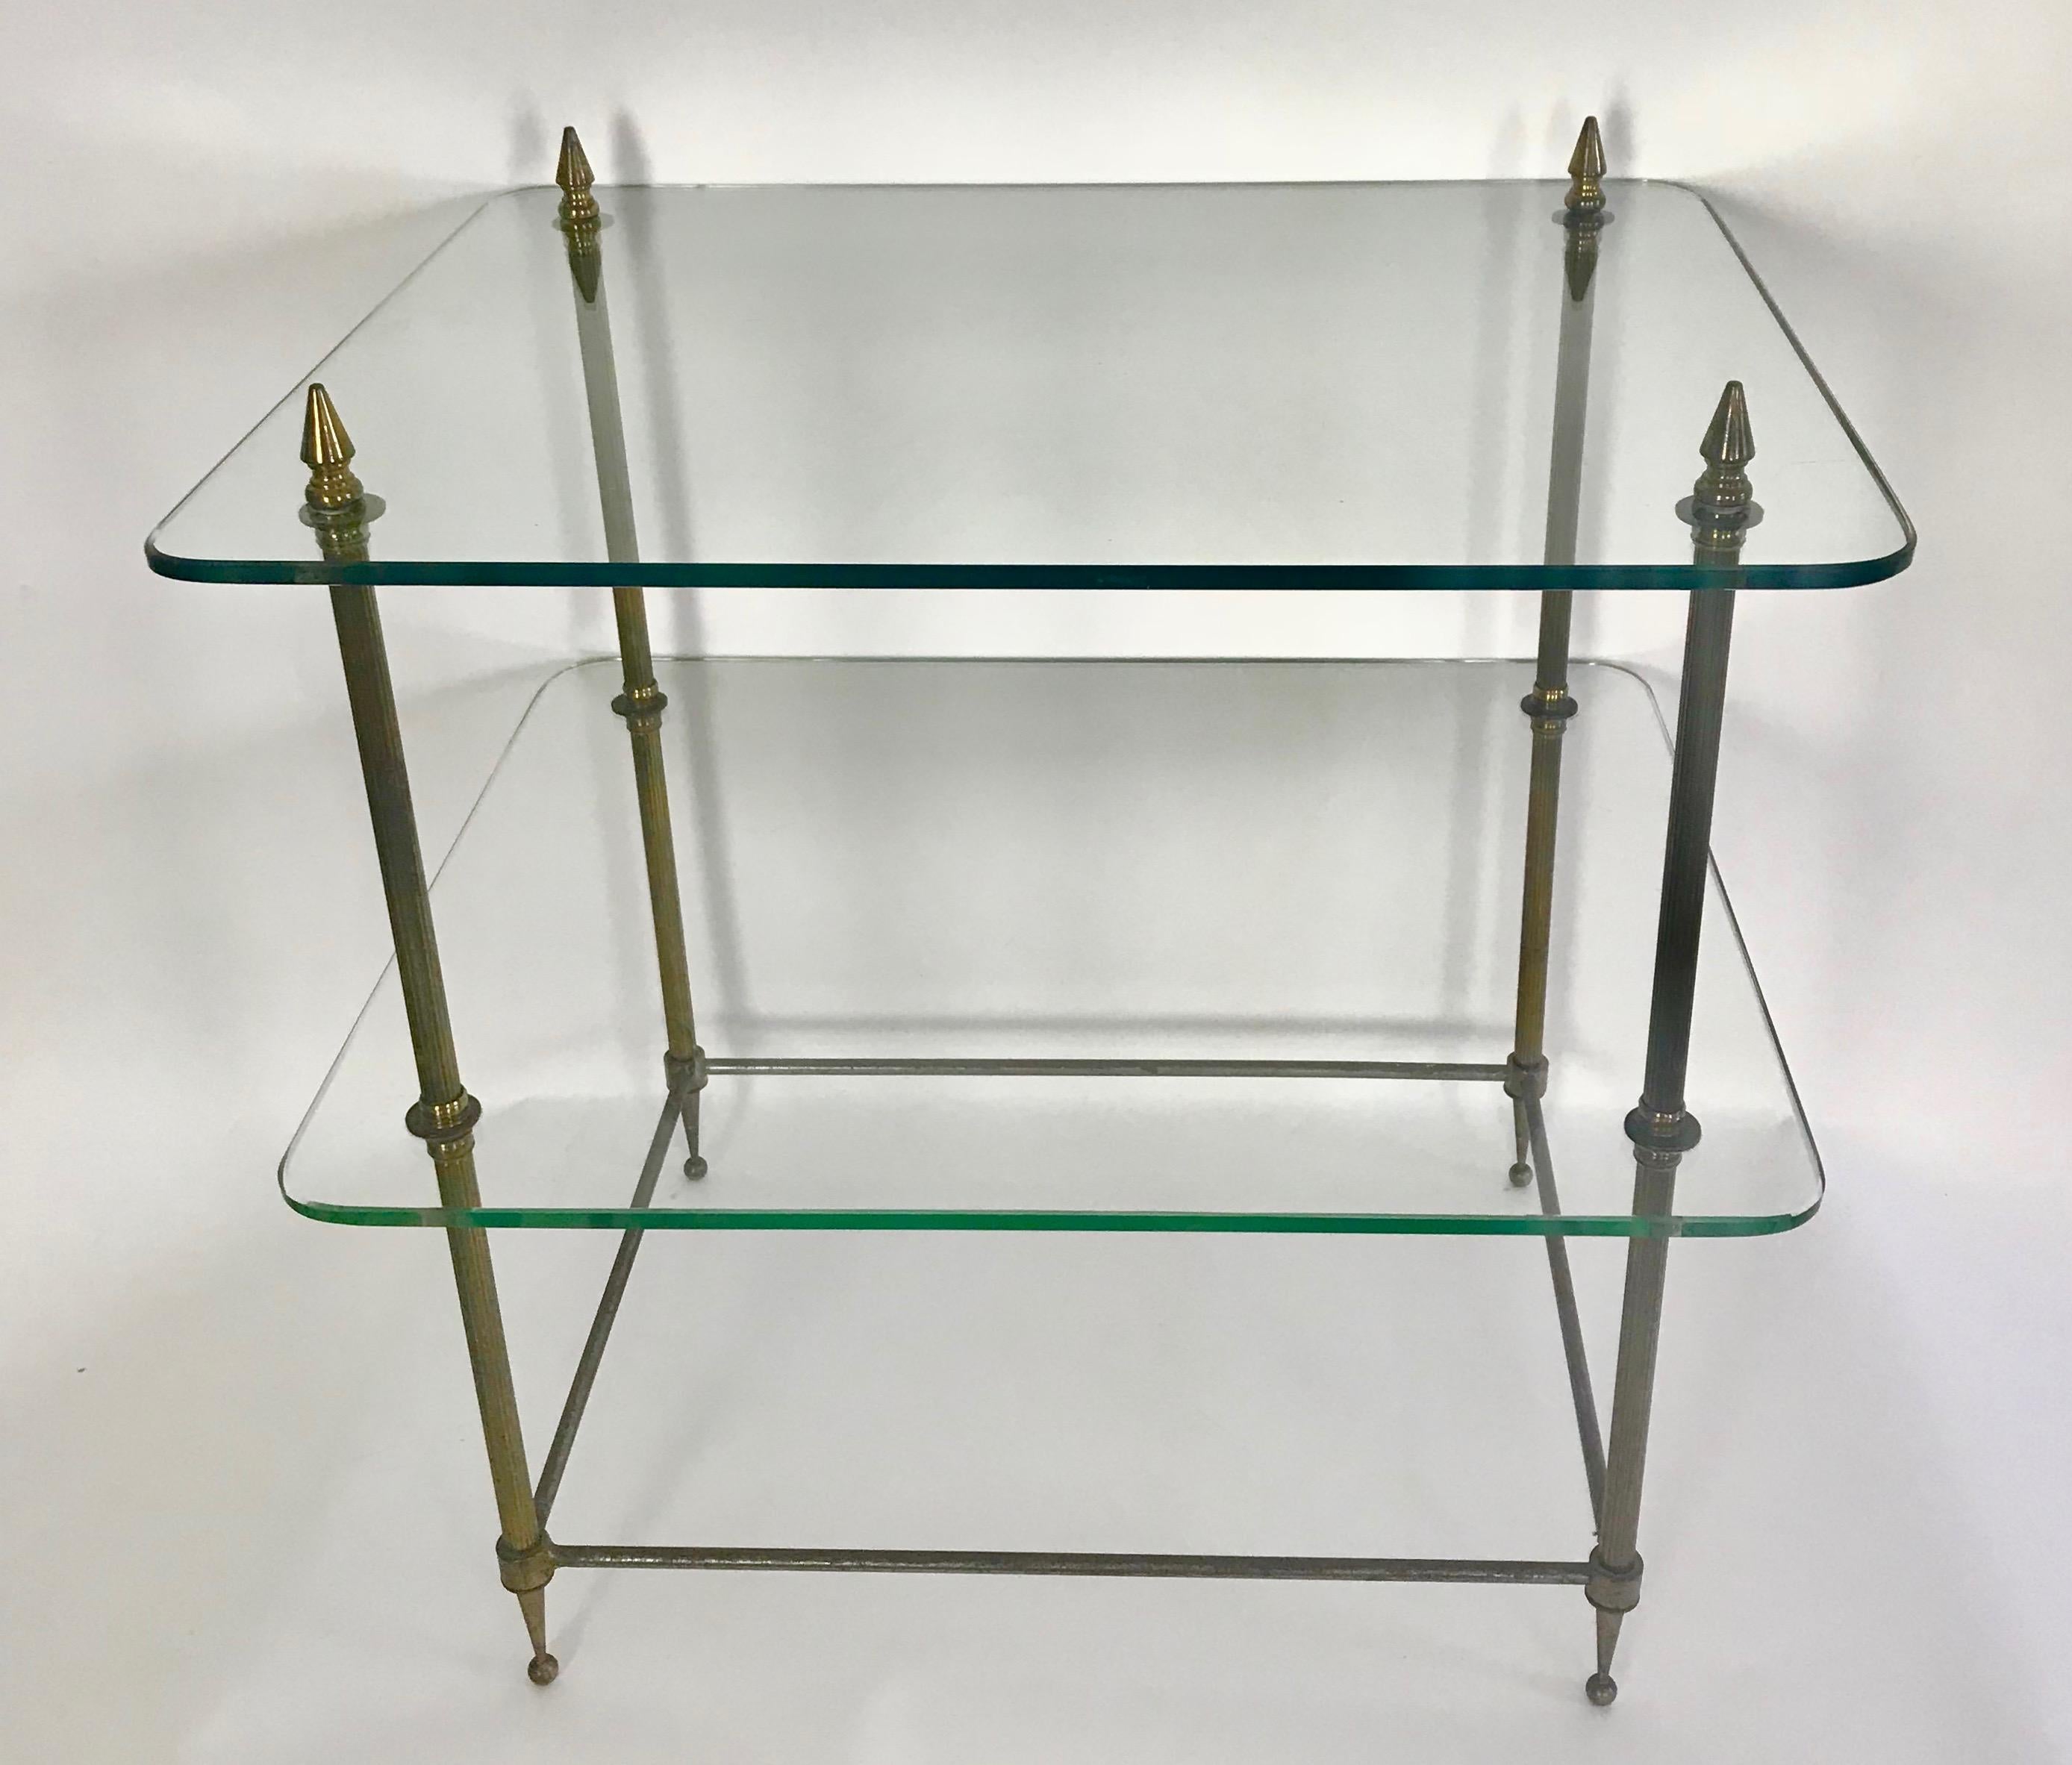 This is an early 20th century two tiered glass and brass side table from France.